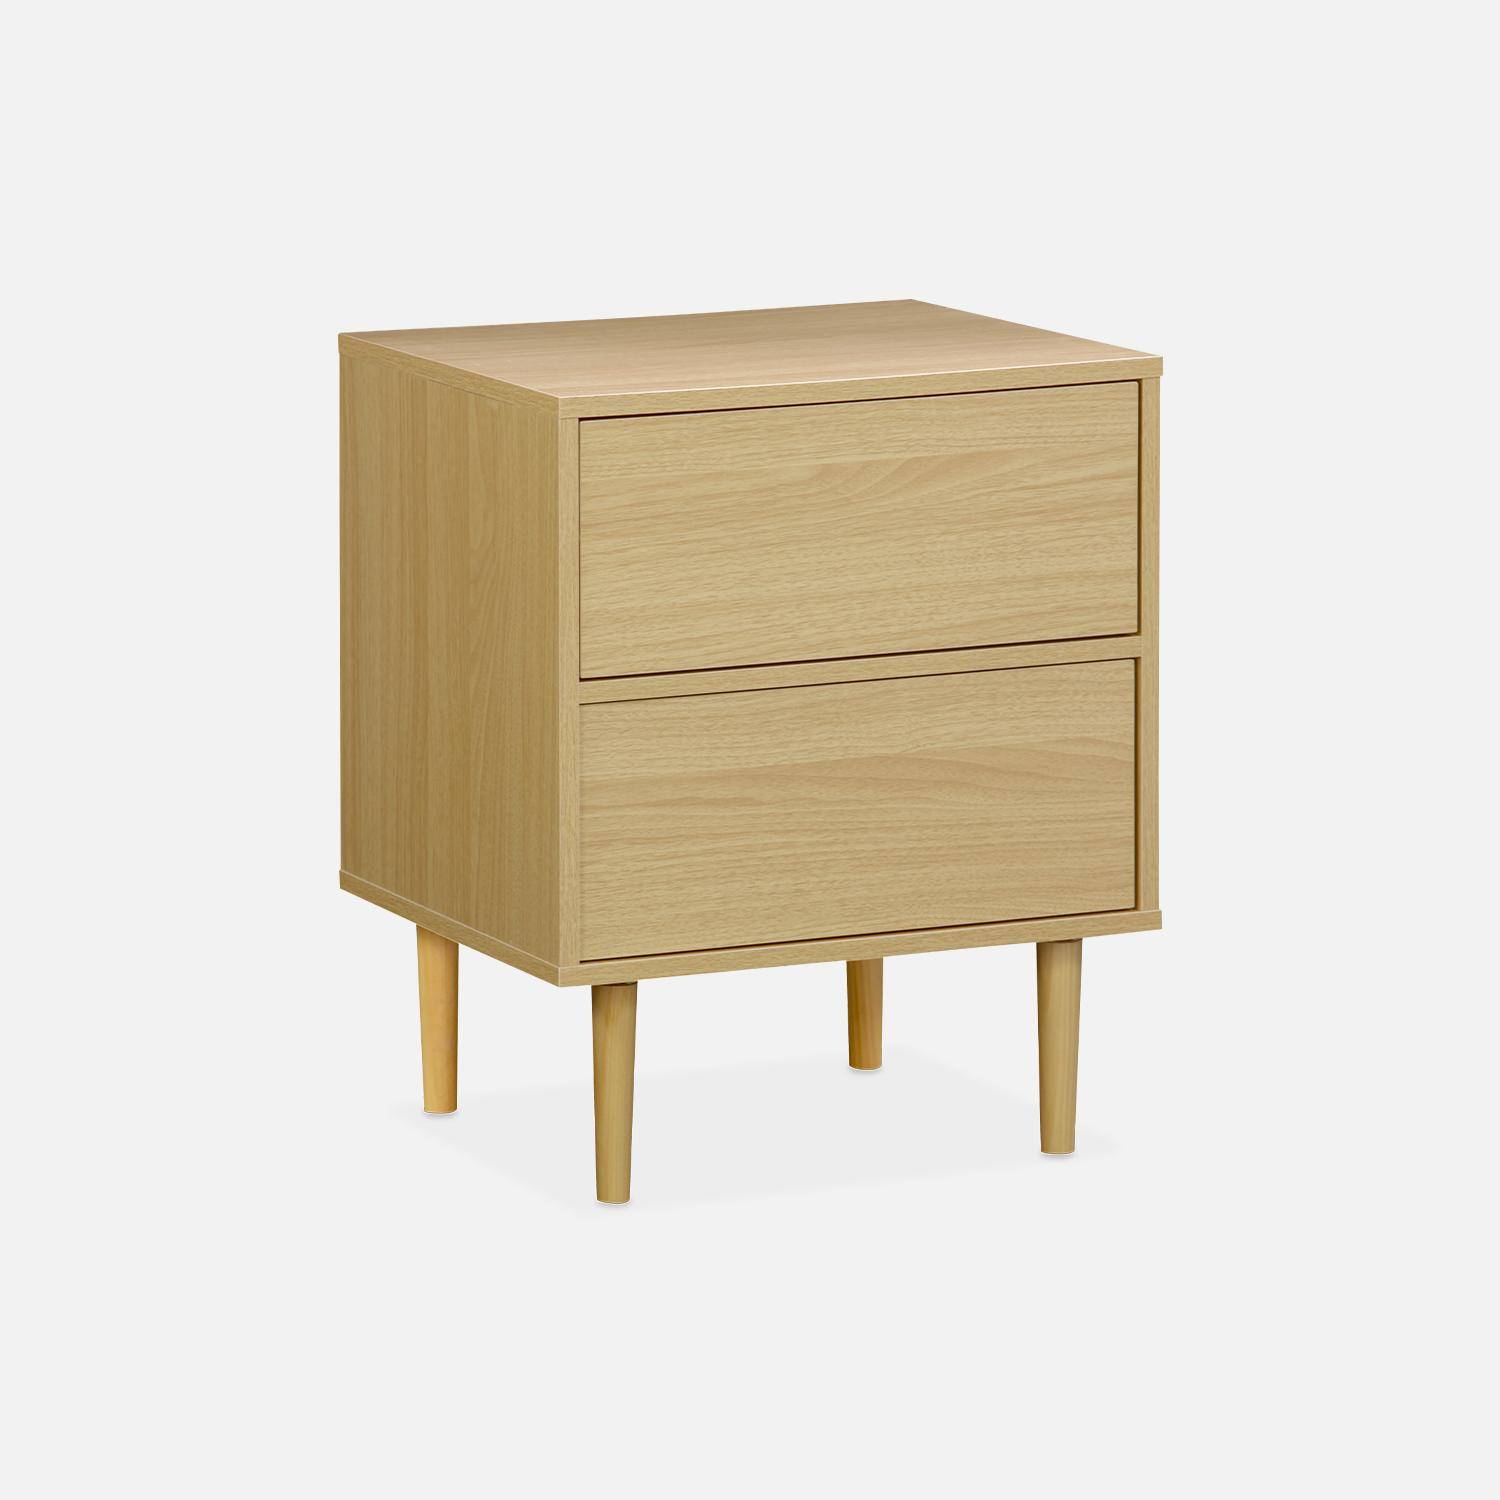 Pair of wood-effect bedside tables with two drawers, 48x40x59cm - Mika - Natural Wood,sweeek,Photo5